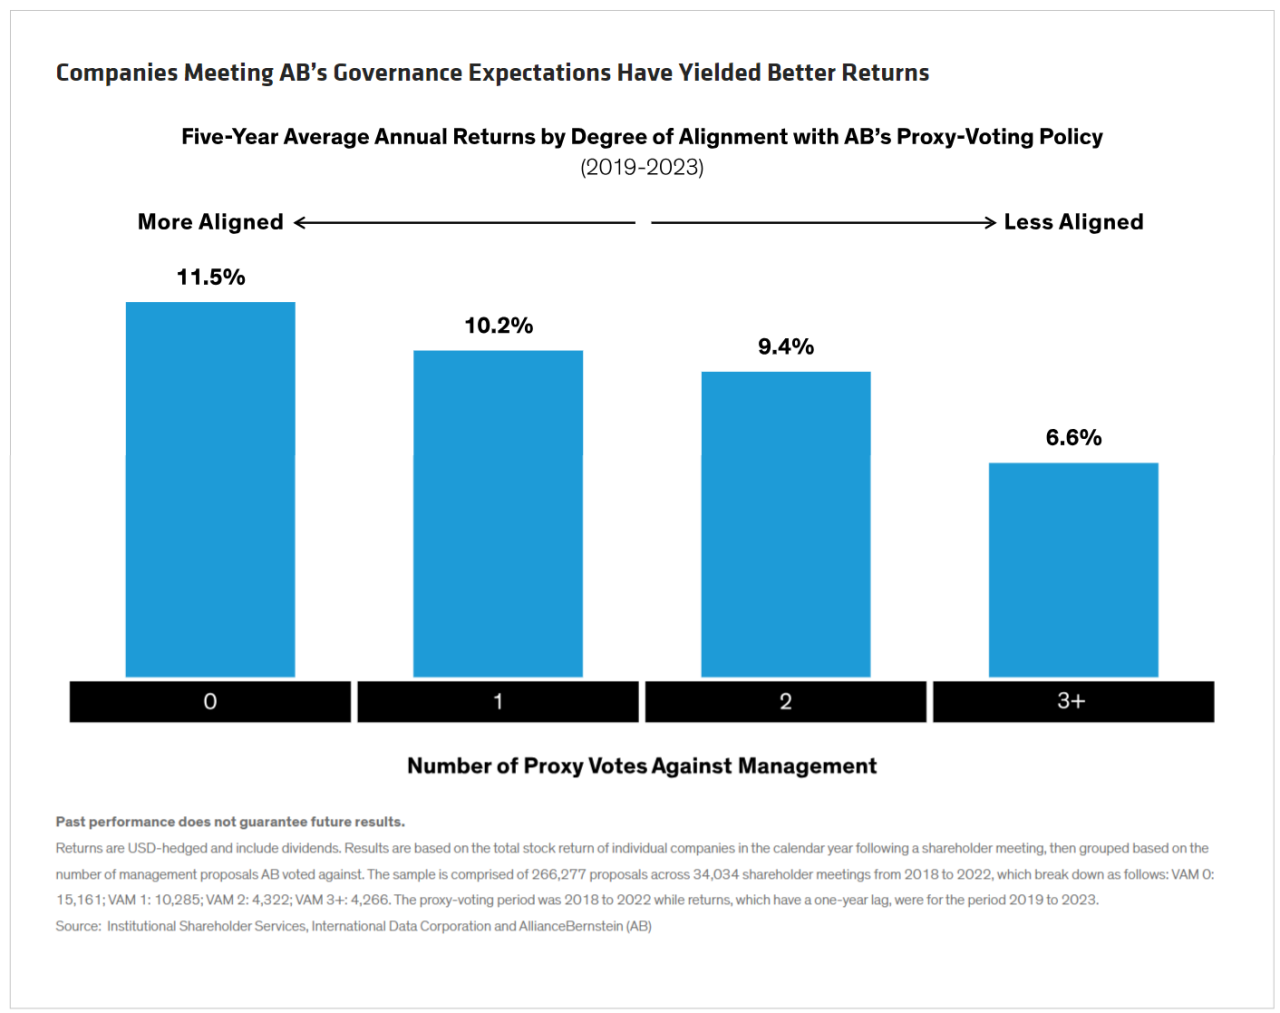 Info graphic bar chart "Companies Meeting AB’s Governance Expectations Have Yielded Better Returns" 